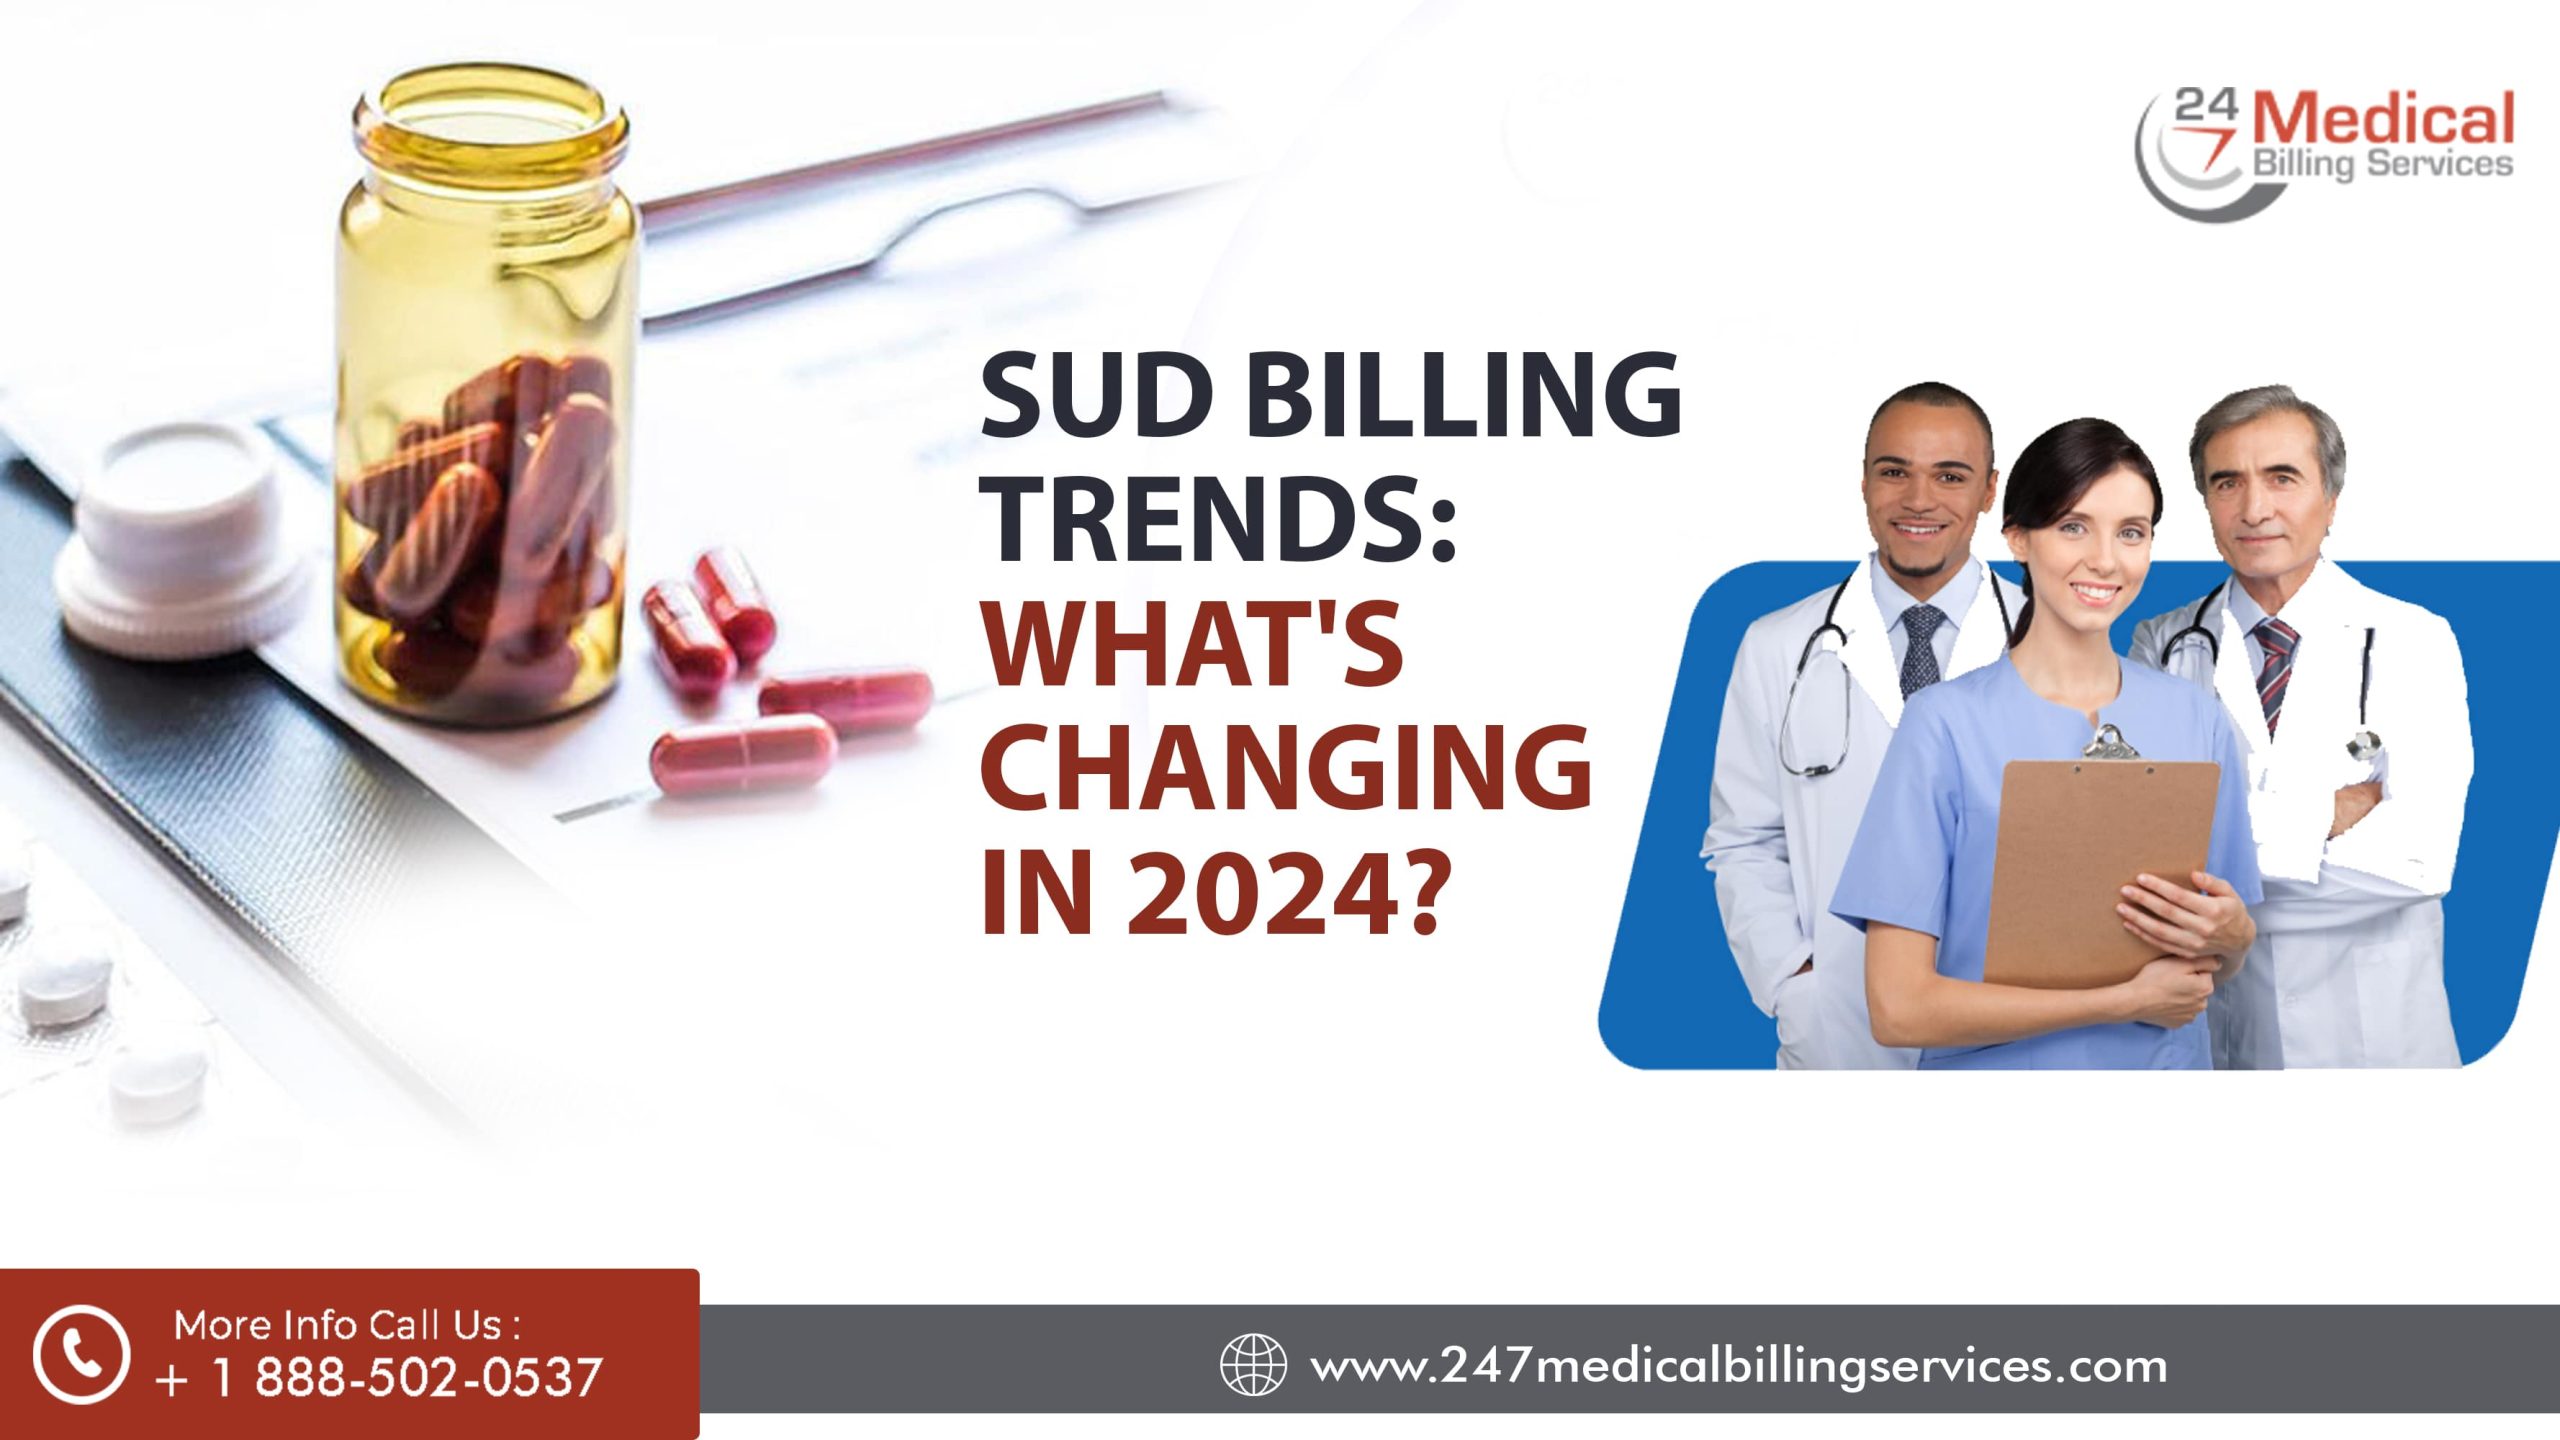  SUD Billing Trends: What’s Changing in 2024?